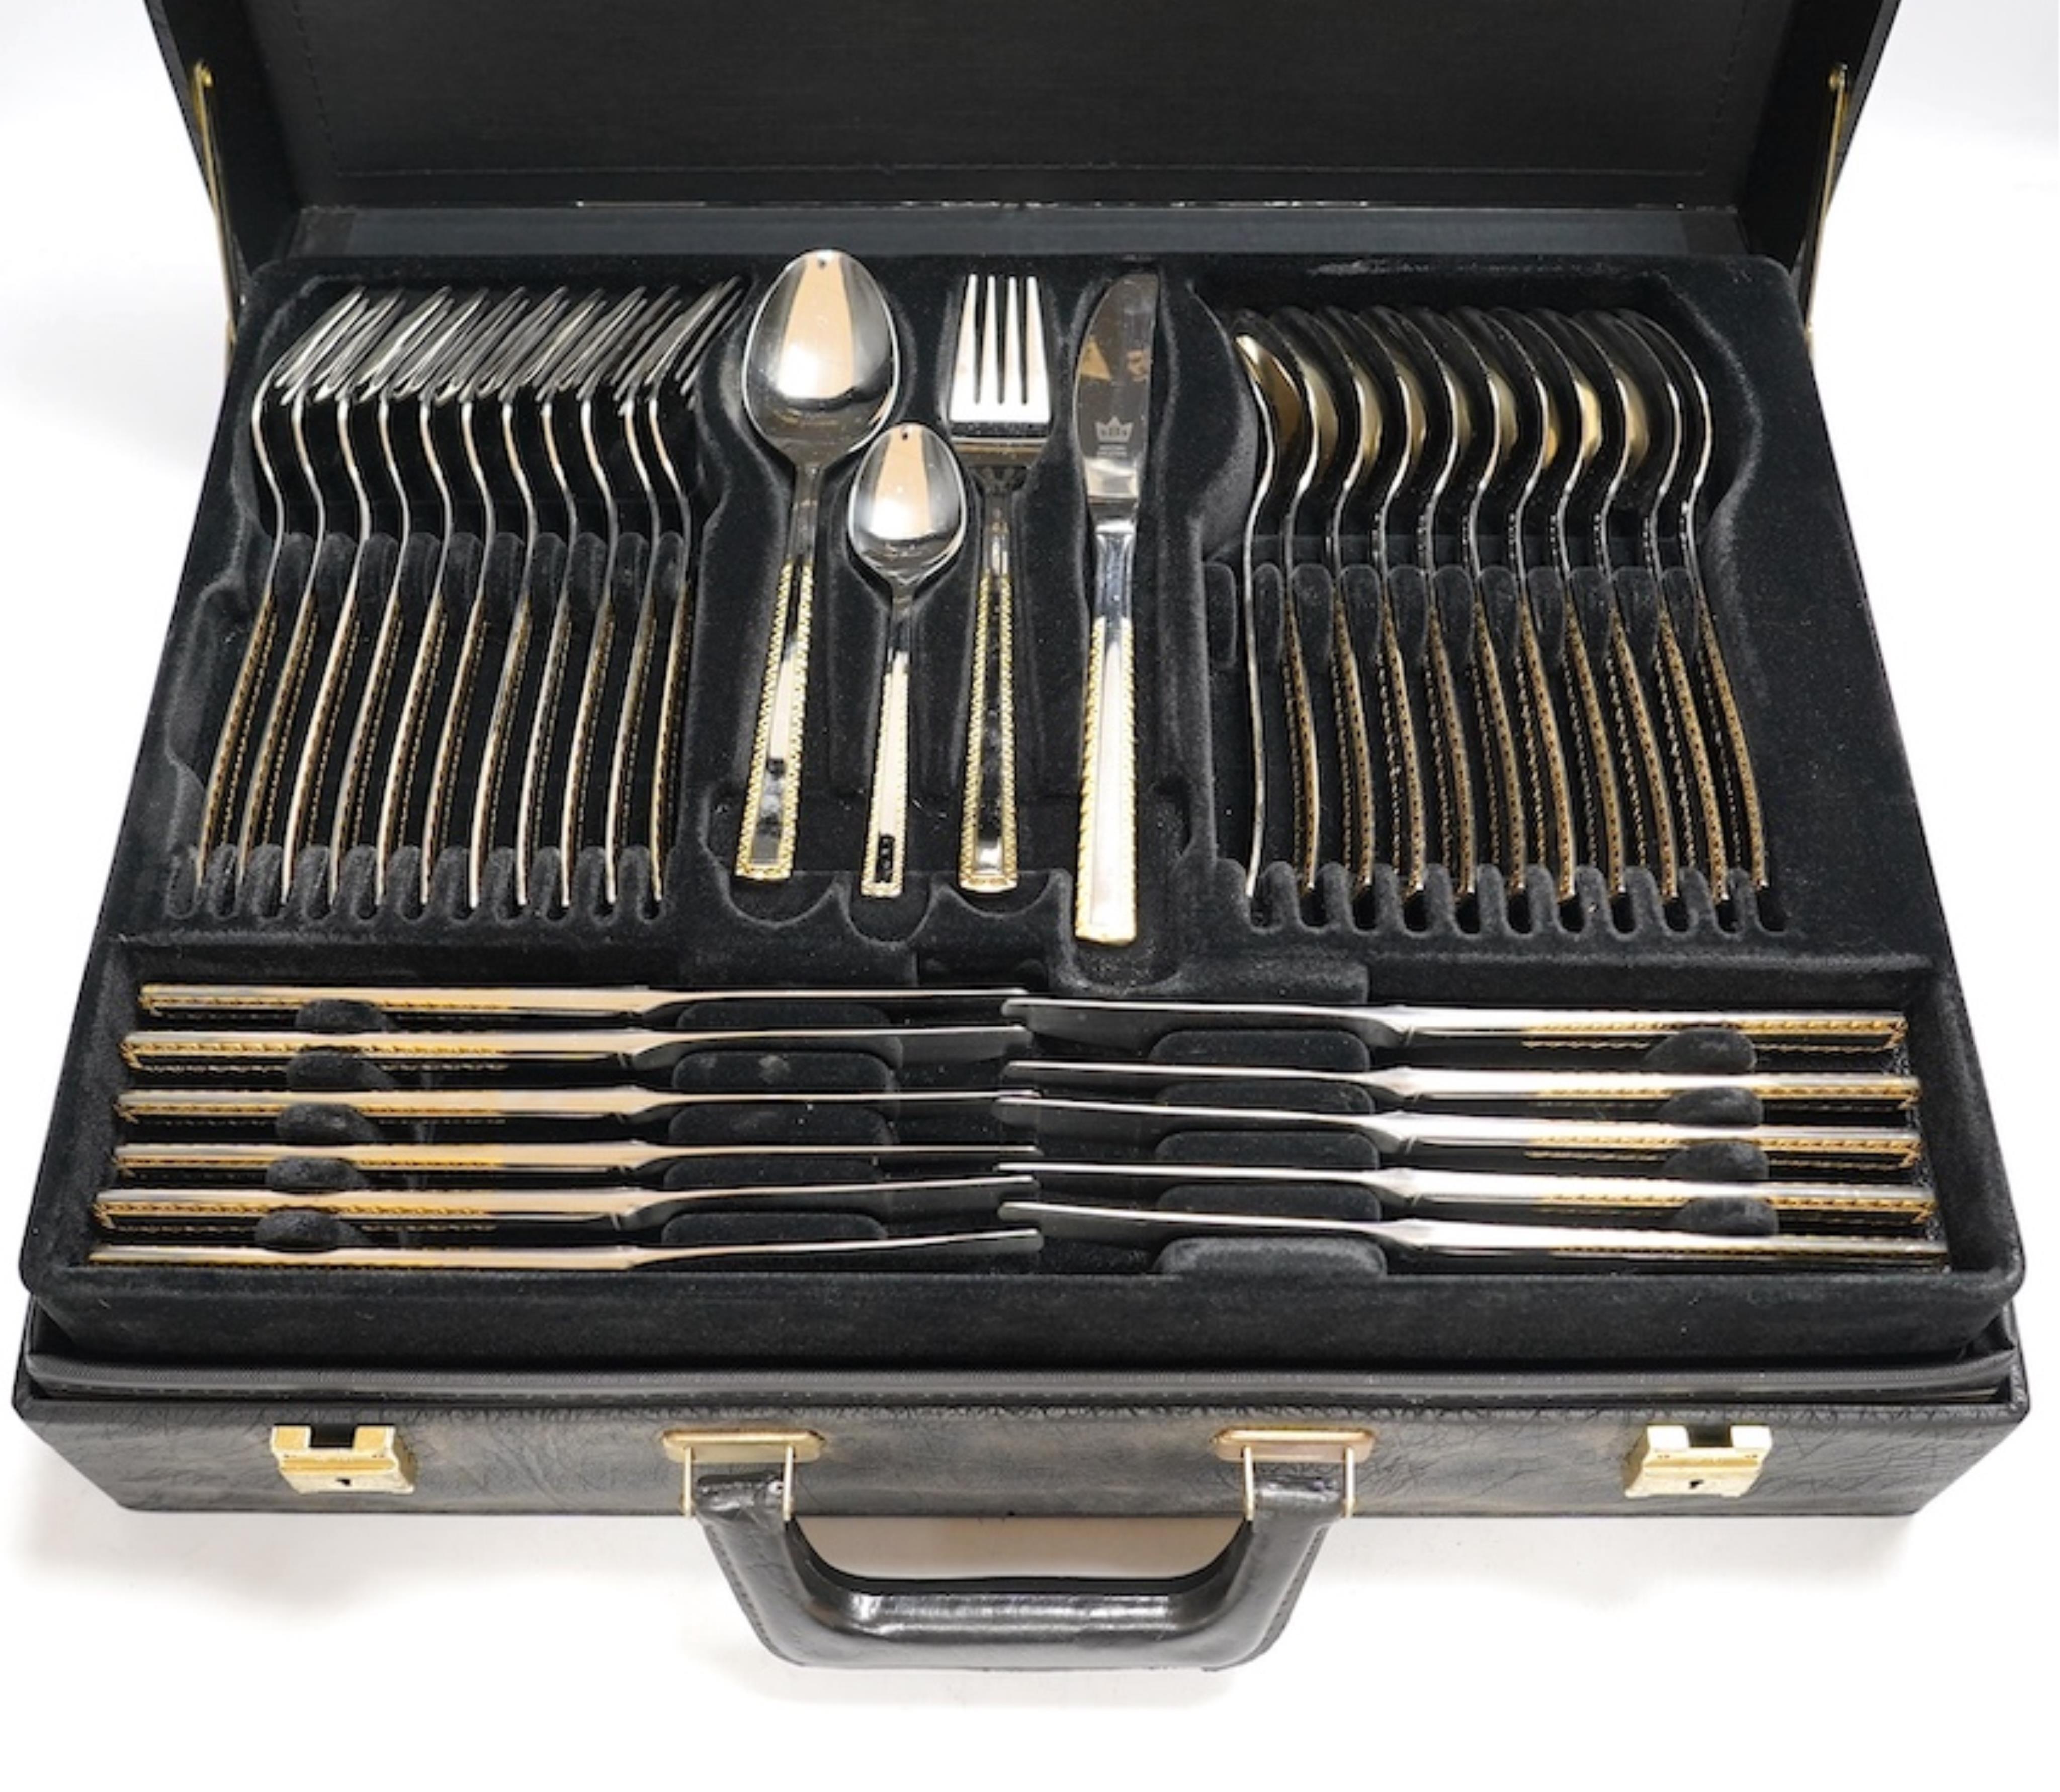 SBS Besteke, Solingen, a suite of plated cutlery. Condition - cutlery good, case in need of a clean